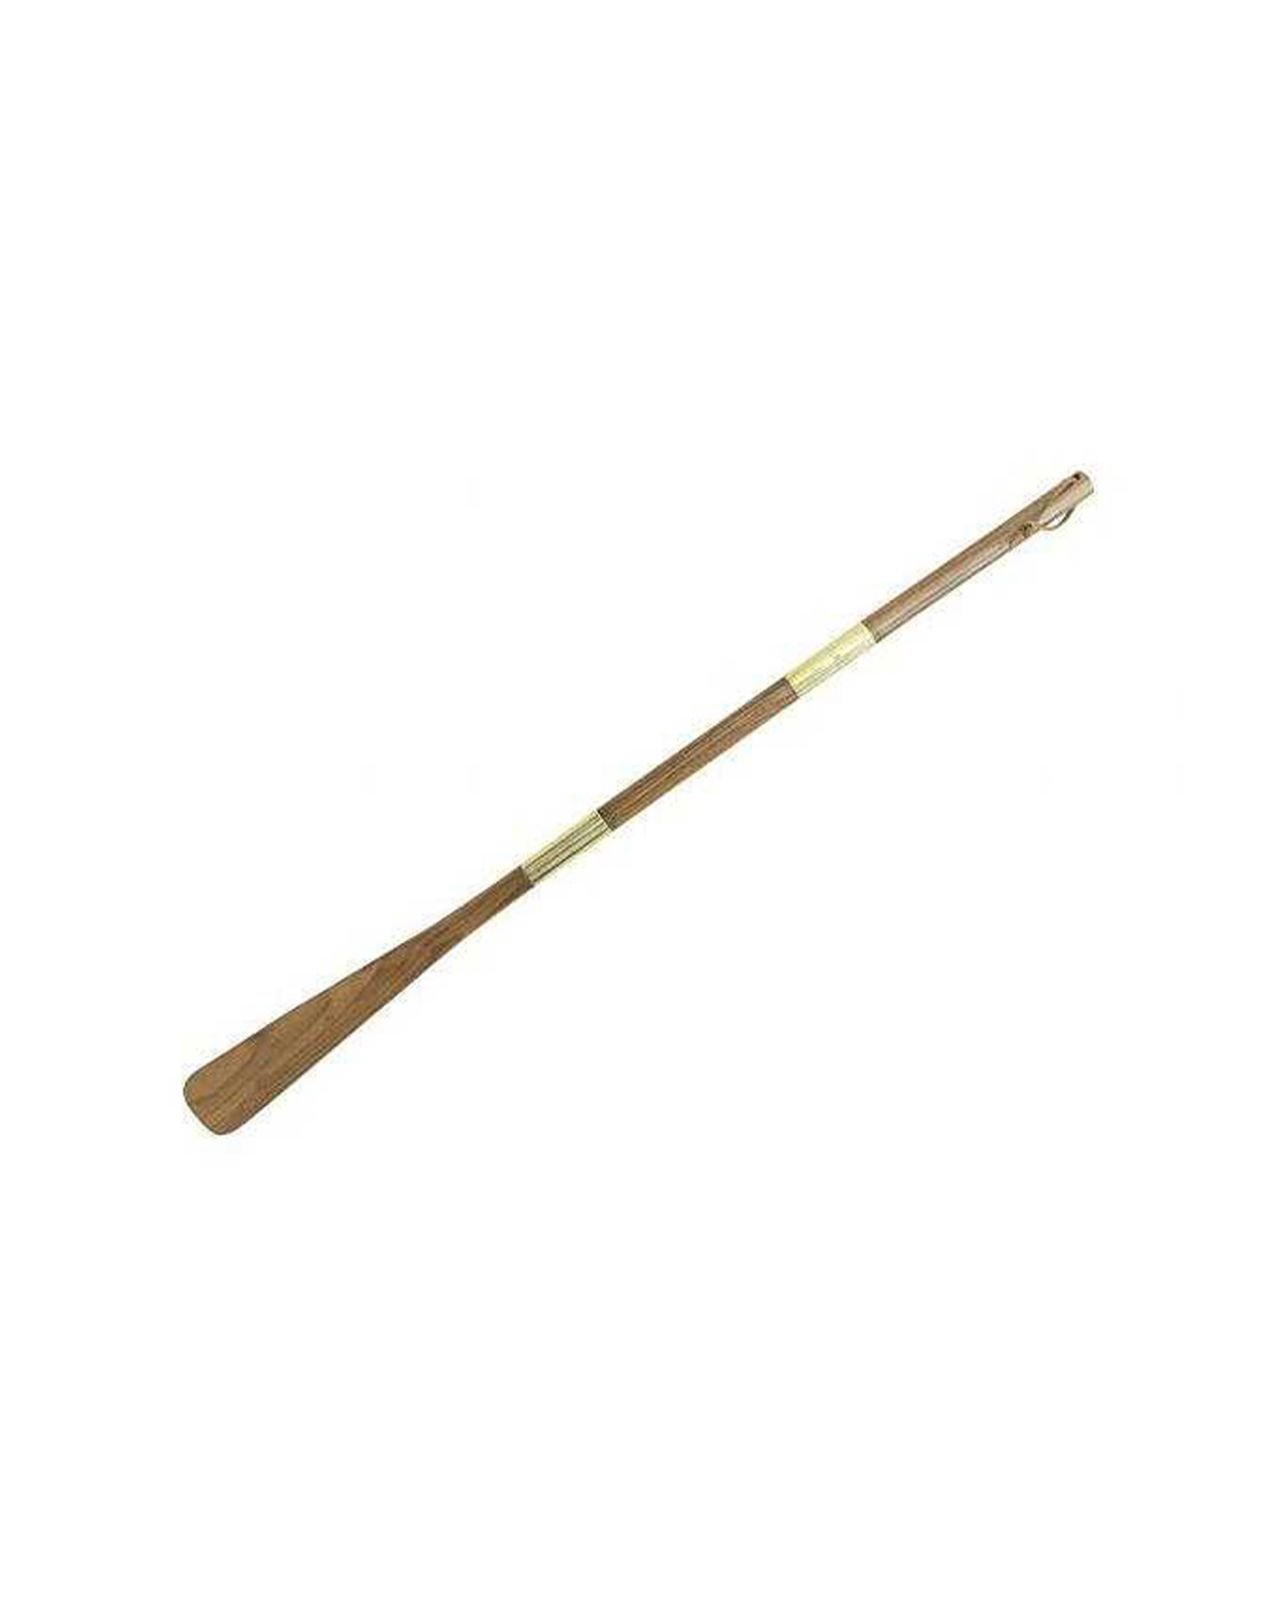 Rowing shoehorn brass